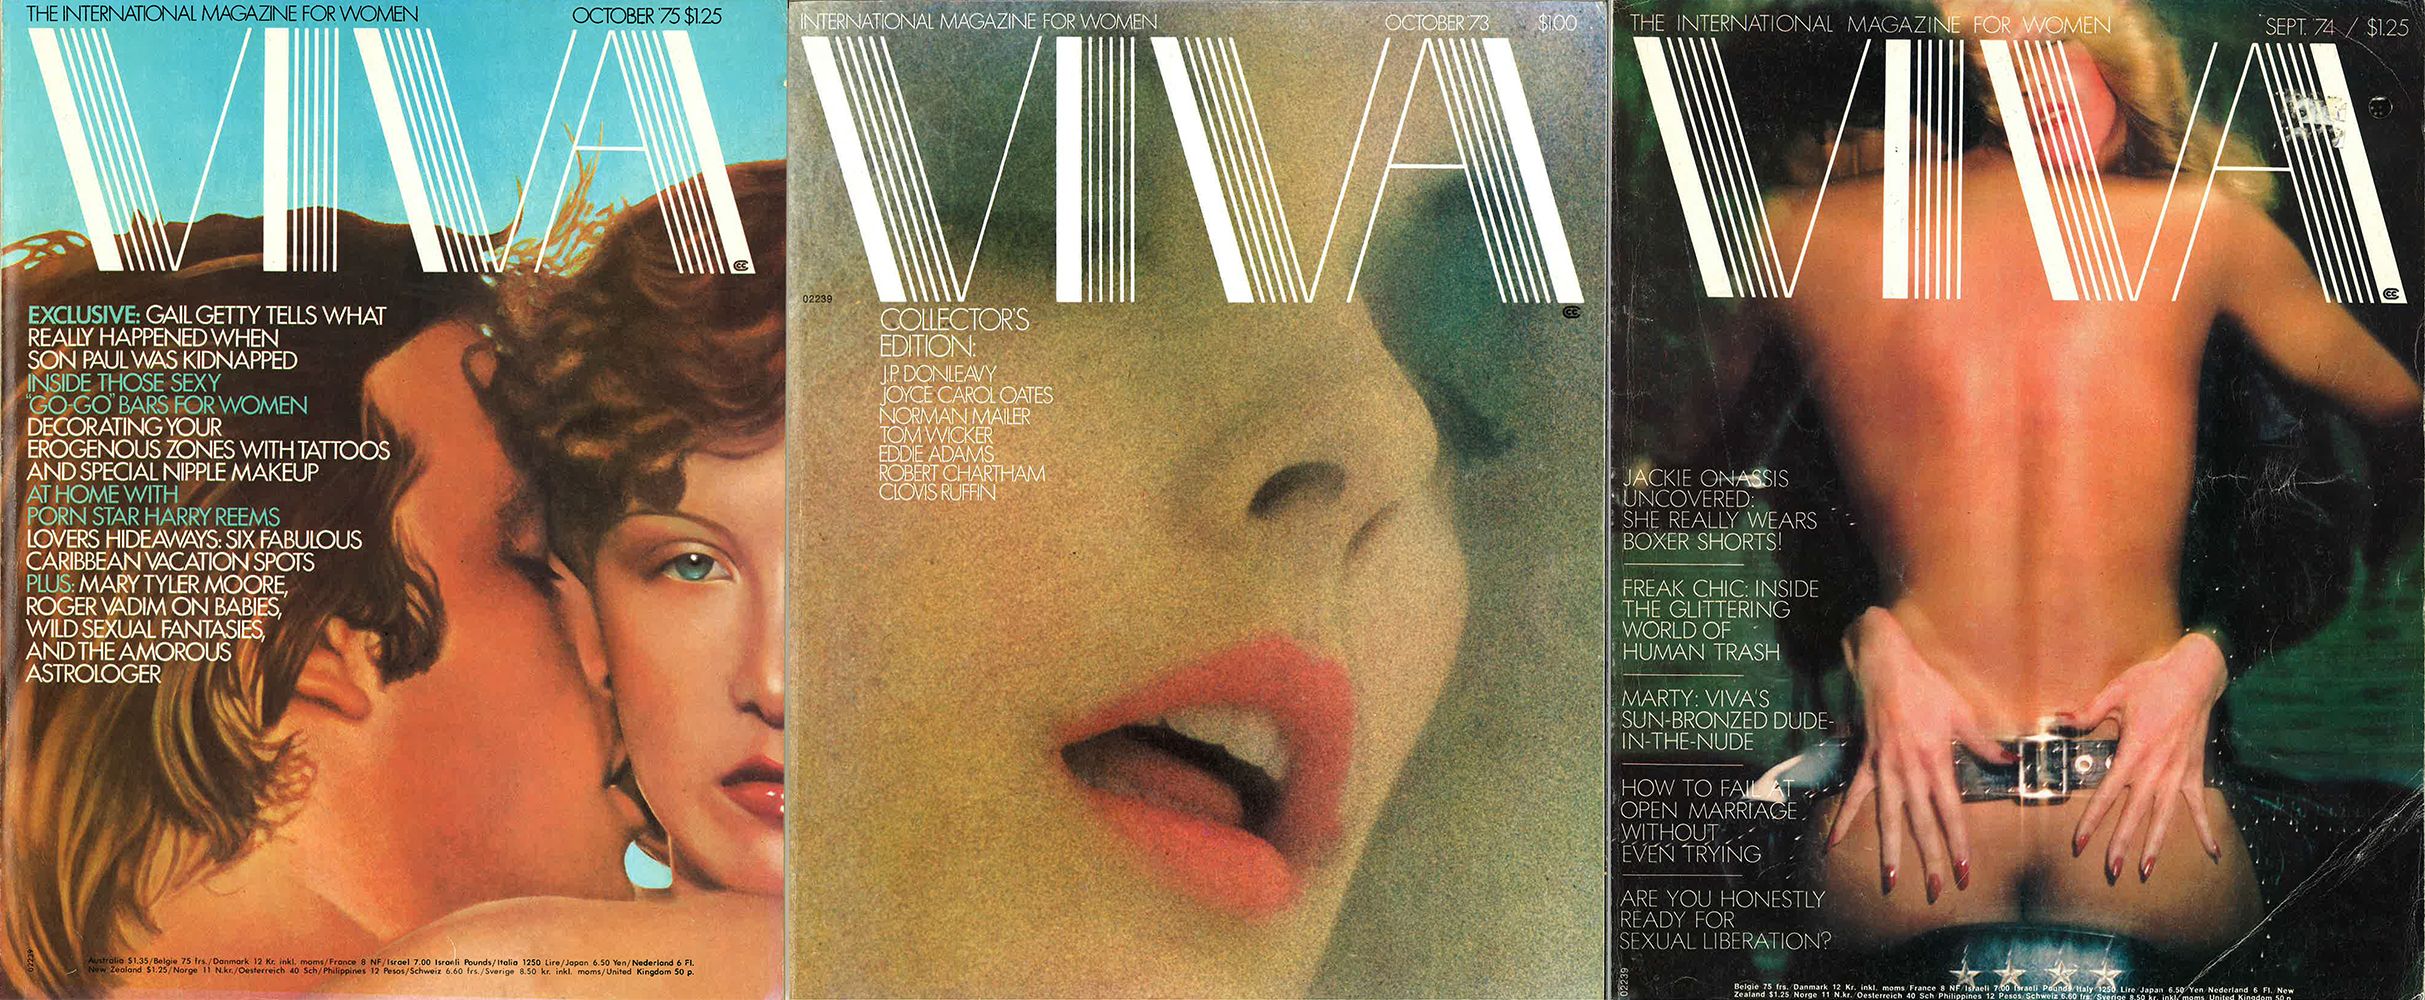 Cheap Porn Magazines From The 70s - An Oral History of Viva, the '70s Porn Magazine for Women